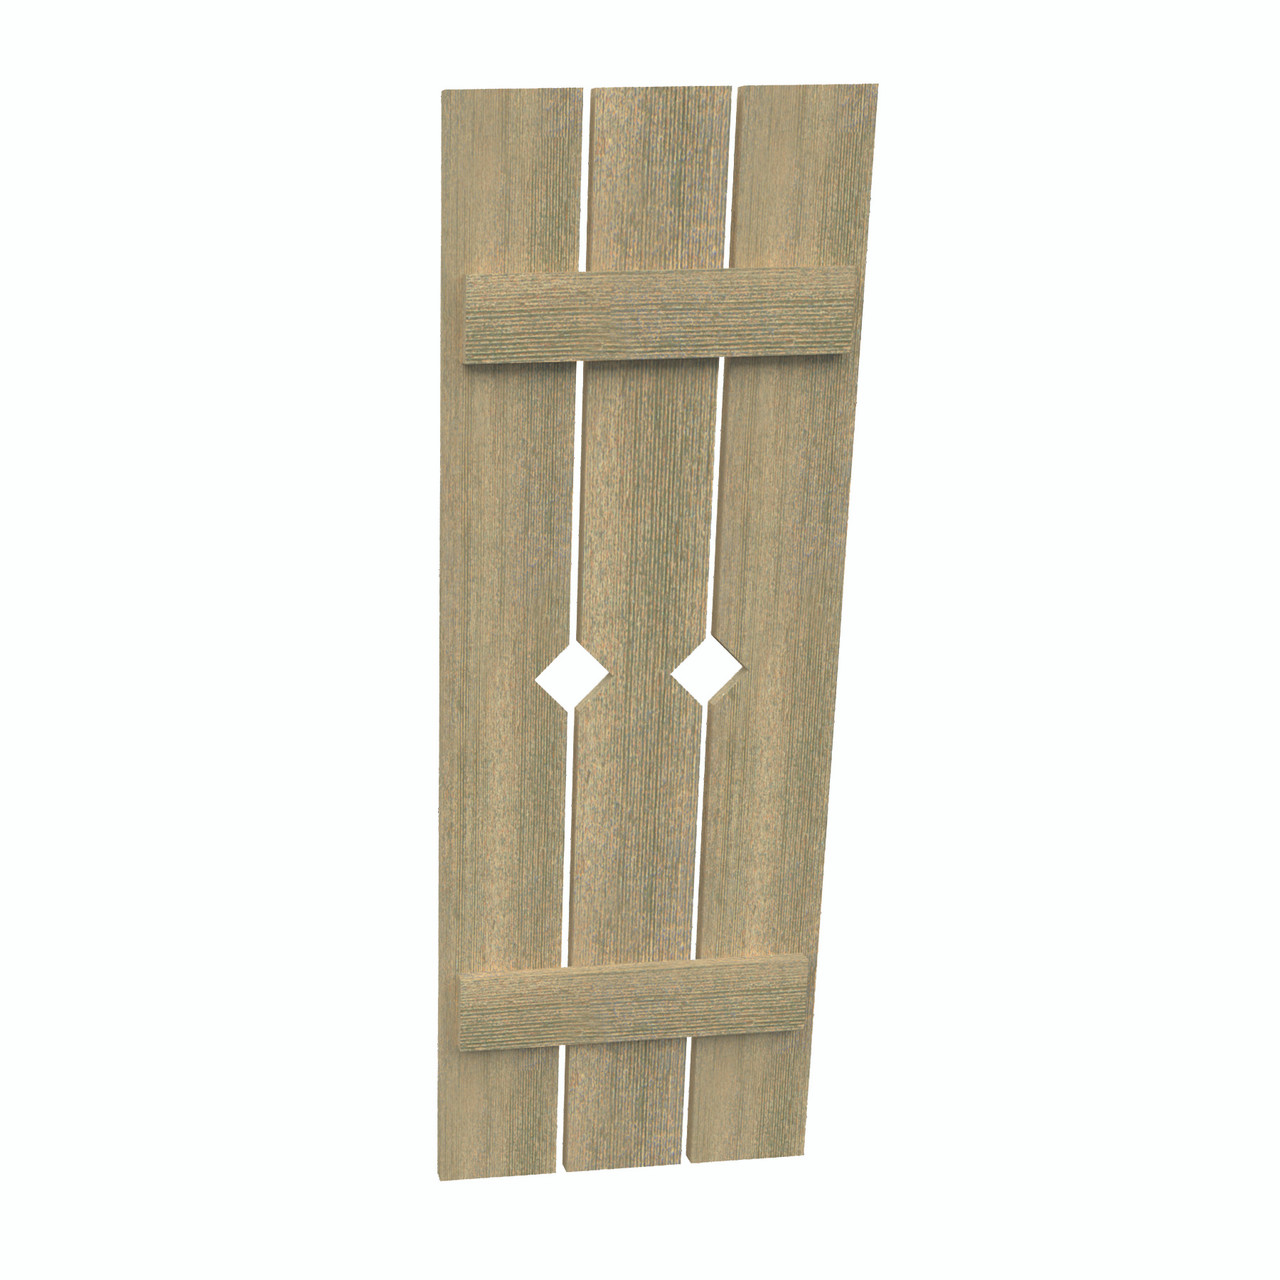 18 inch by 118 inch Plank Shutter with 3-Plank, Diamond